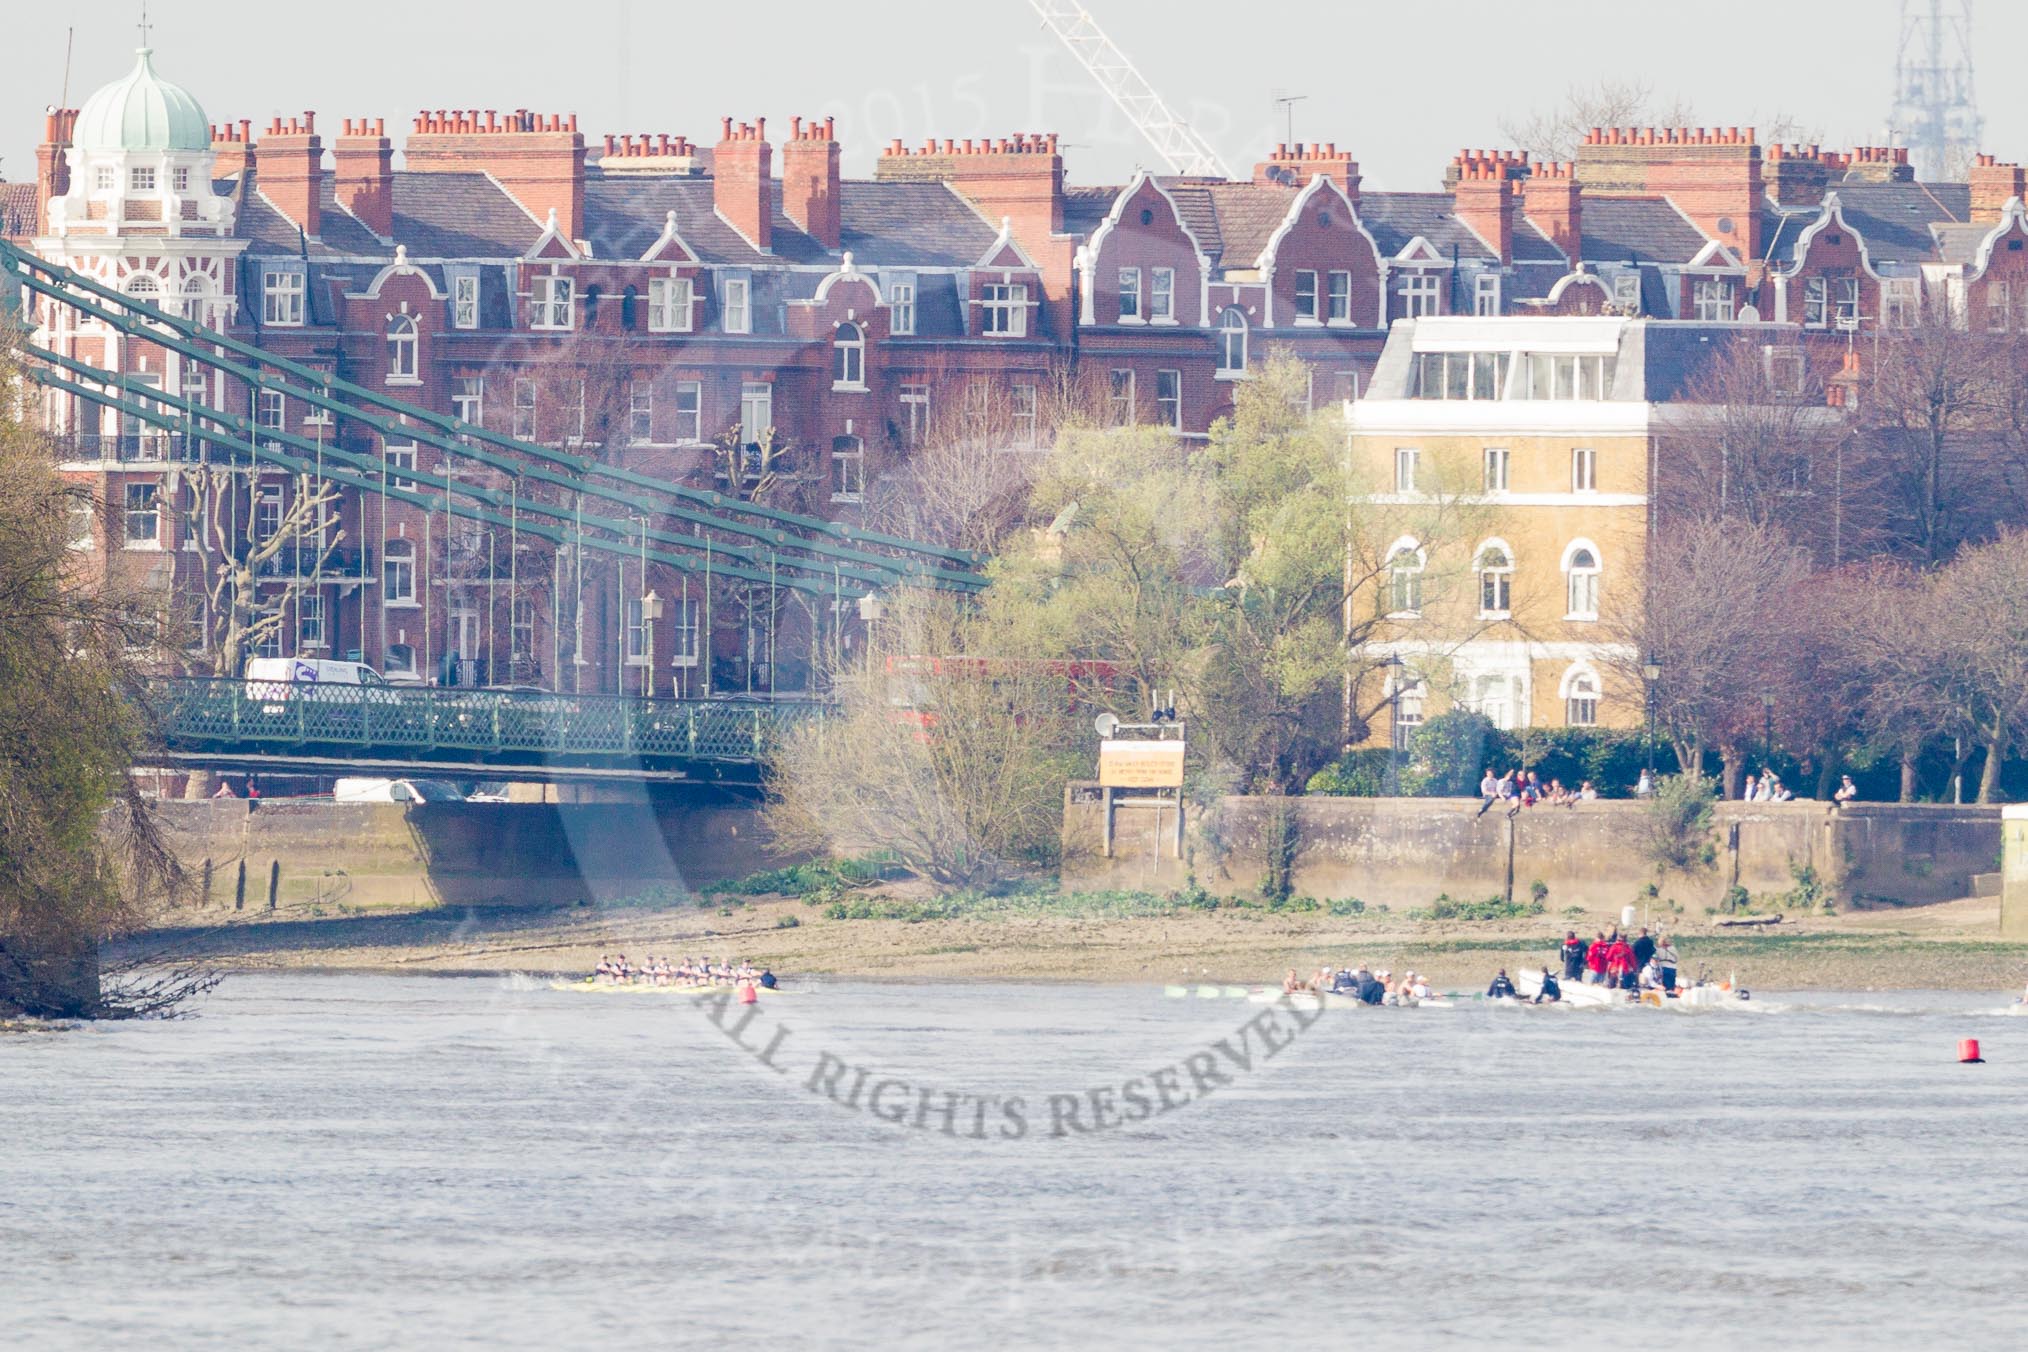 The Boat Race season 2015 - Newton Women's Boat Race.
River Thames between Putney and Mortlake,
London,

United Kingdom,
on 10 April 2015 at 16:08, image #164